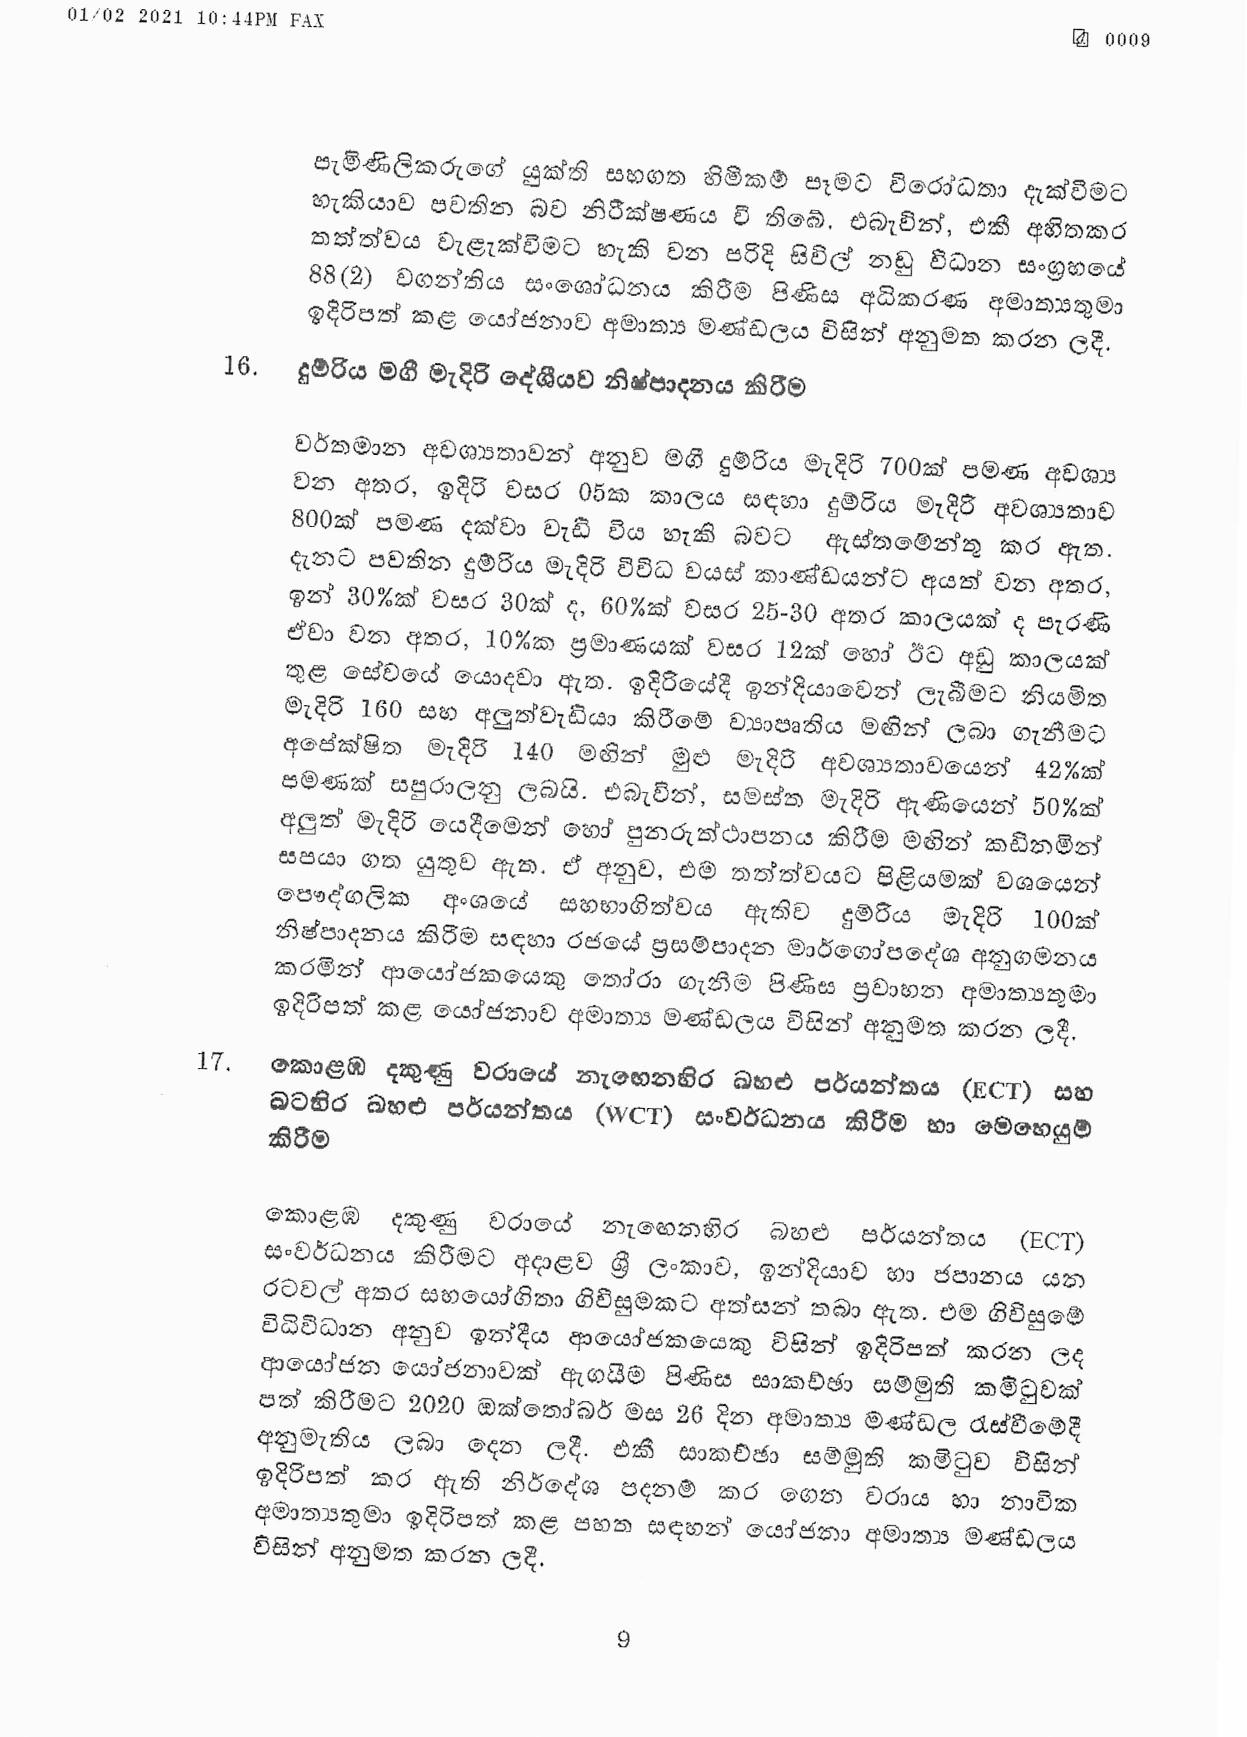 Cabinet Decision on 01.02.2021 page 009